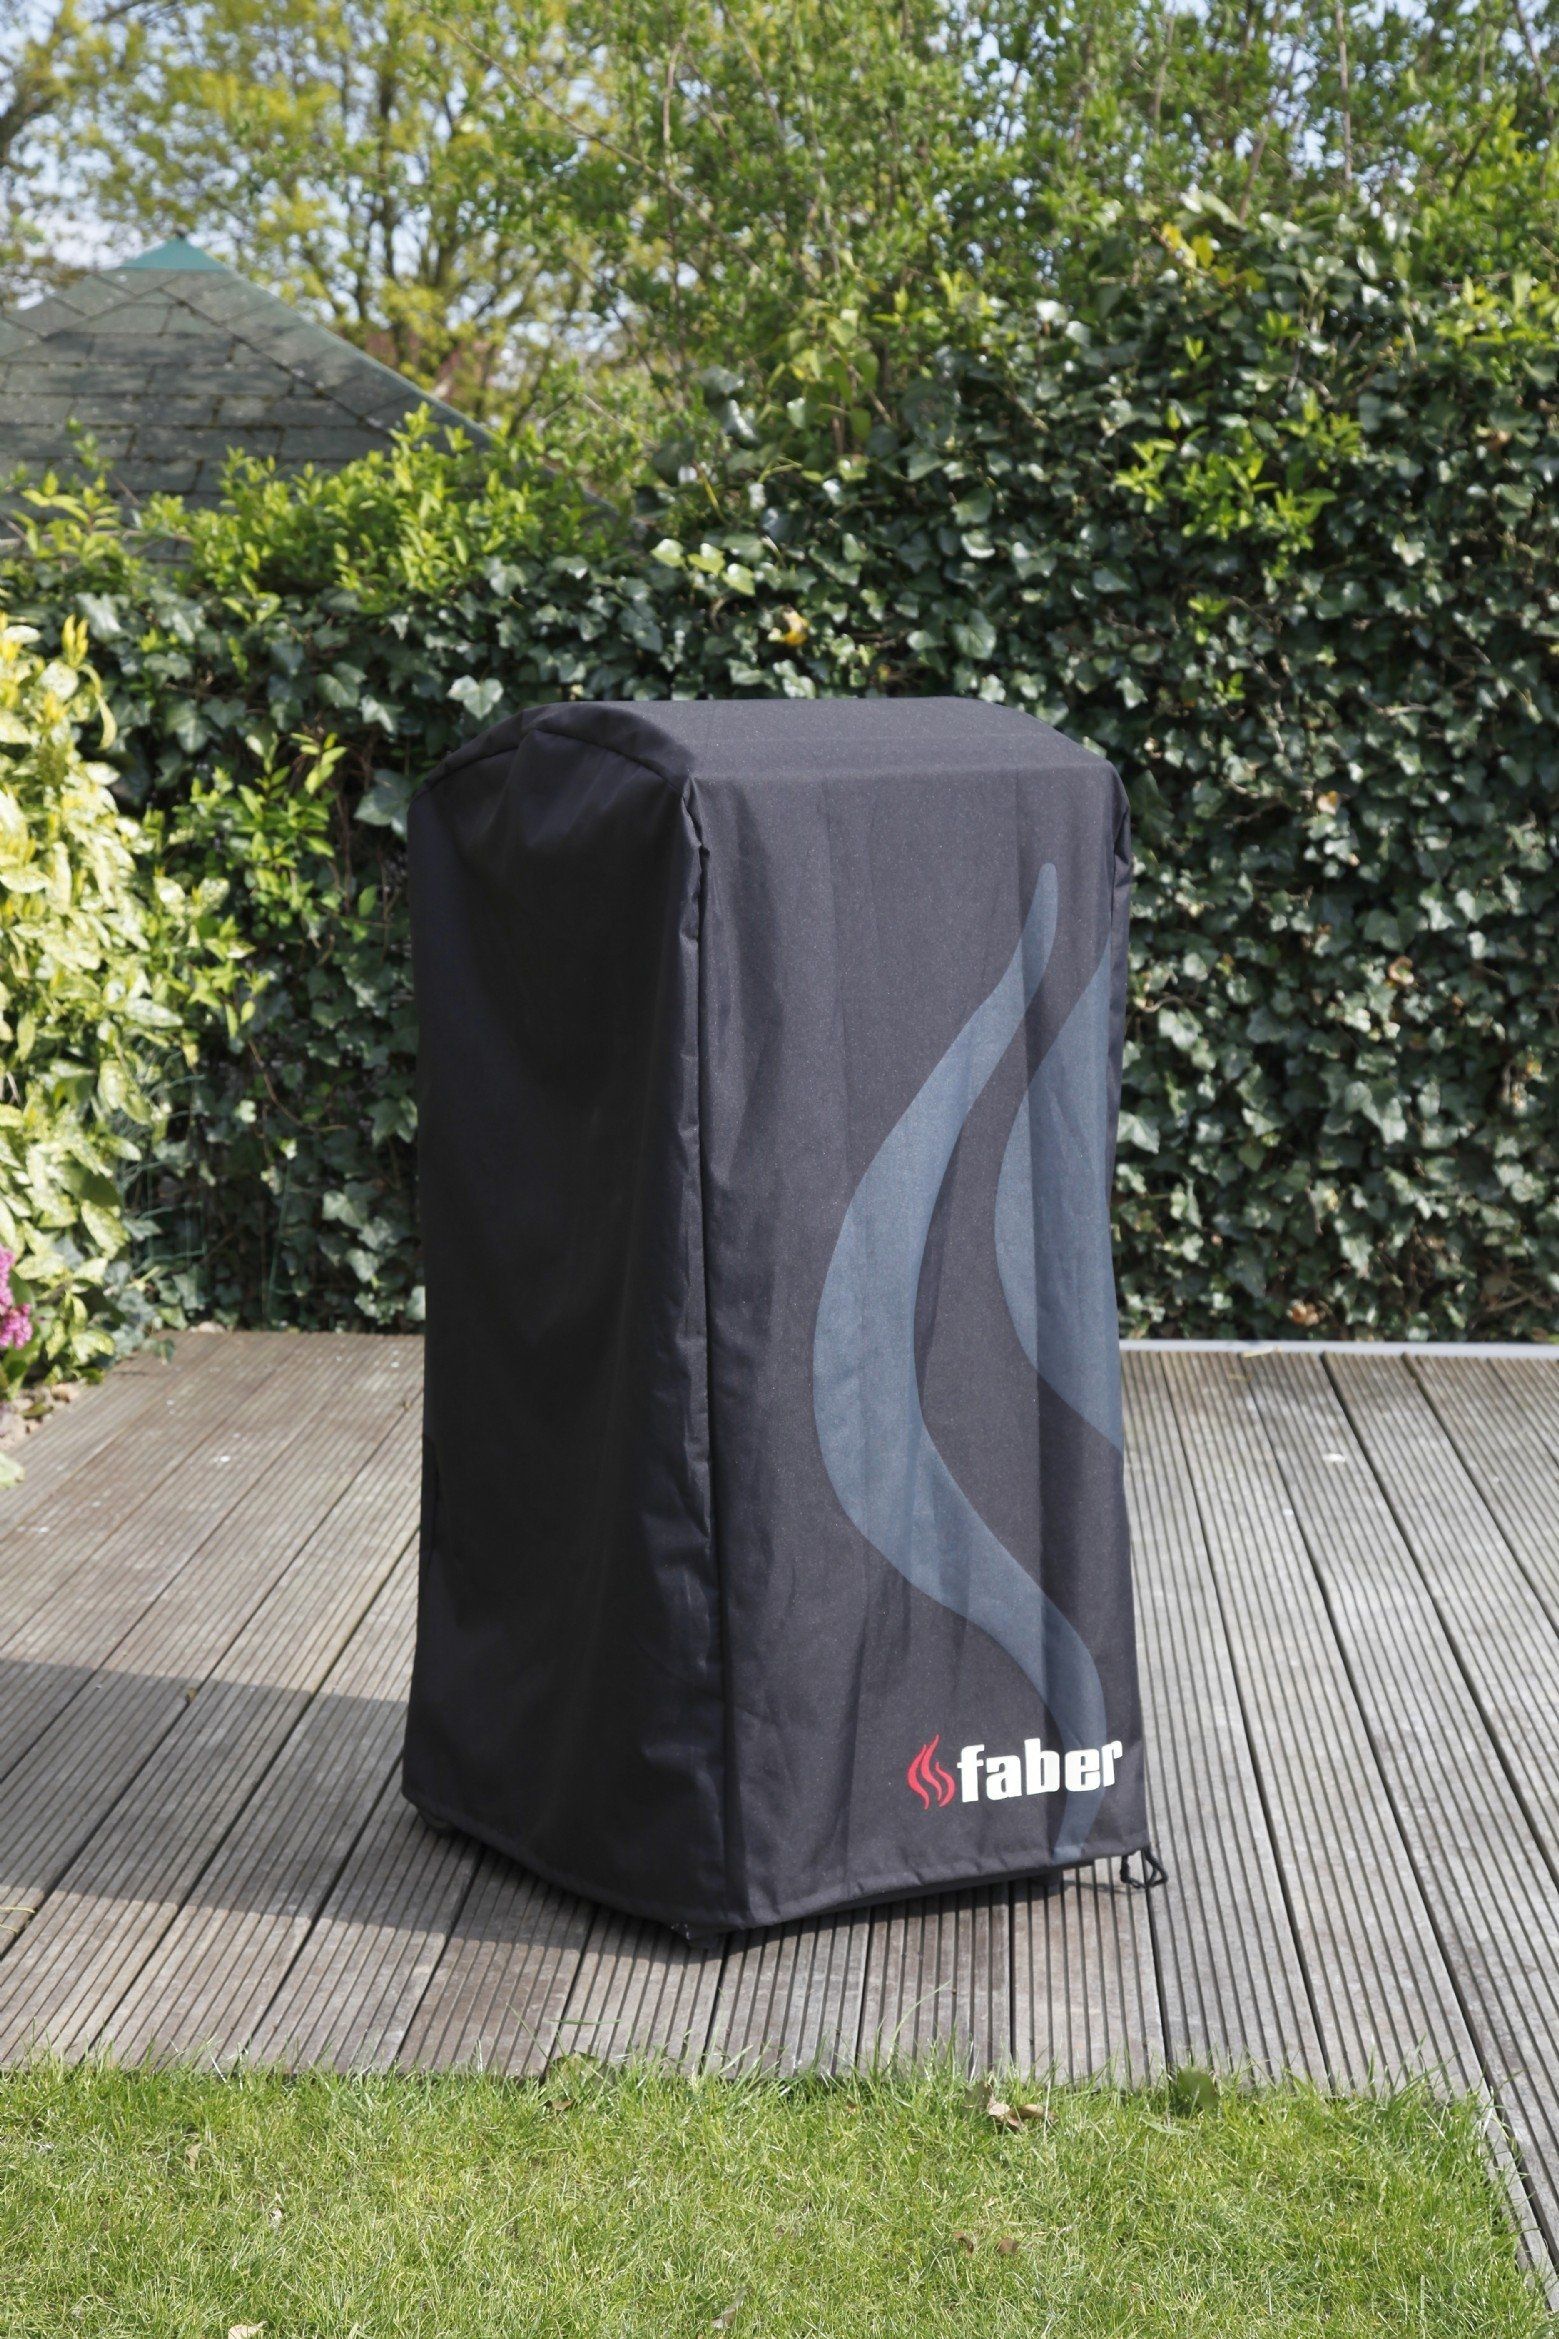 Faber The Buzz Protective Cover